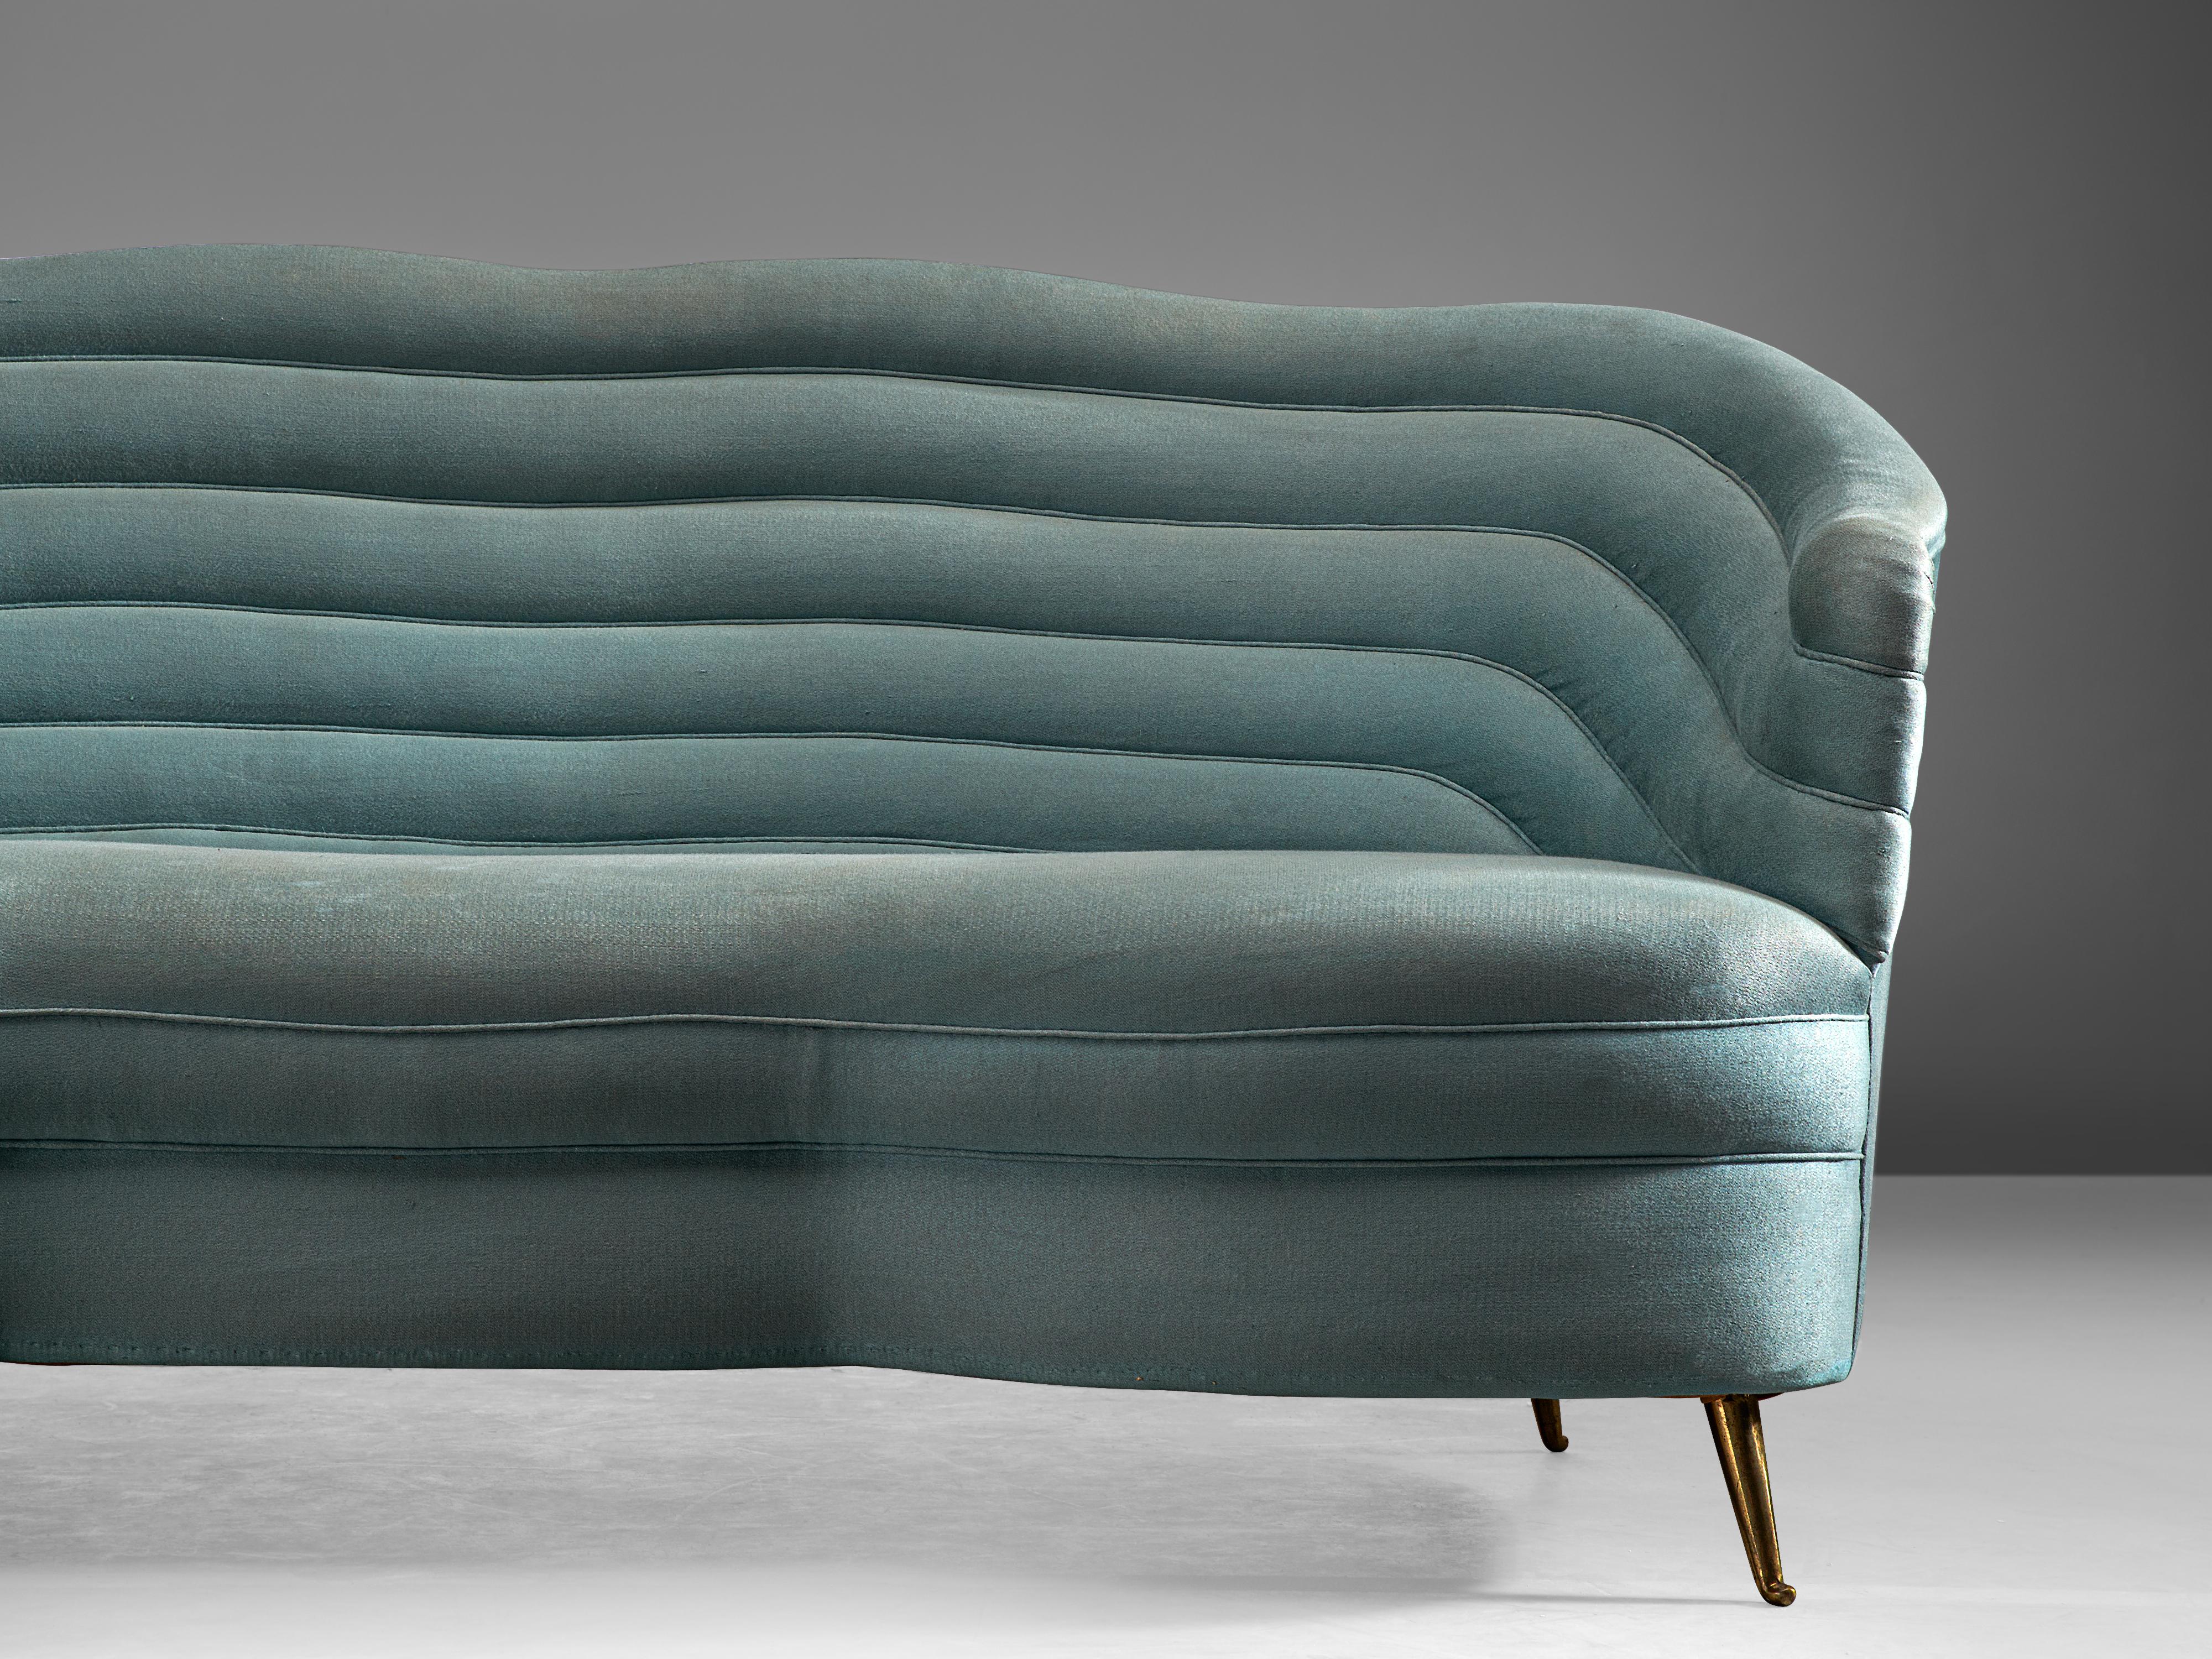 Mid-20th Century Andrea Busiri Vici Sofa in Turquoise Blue Upholstery